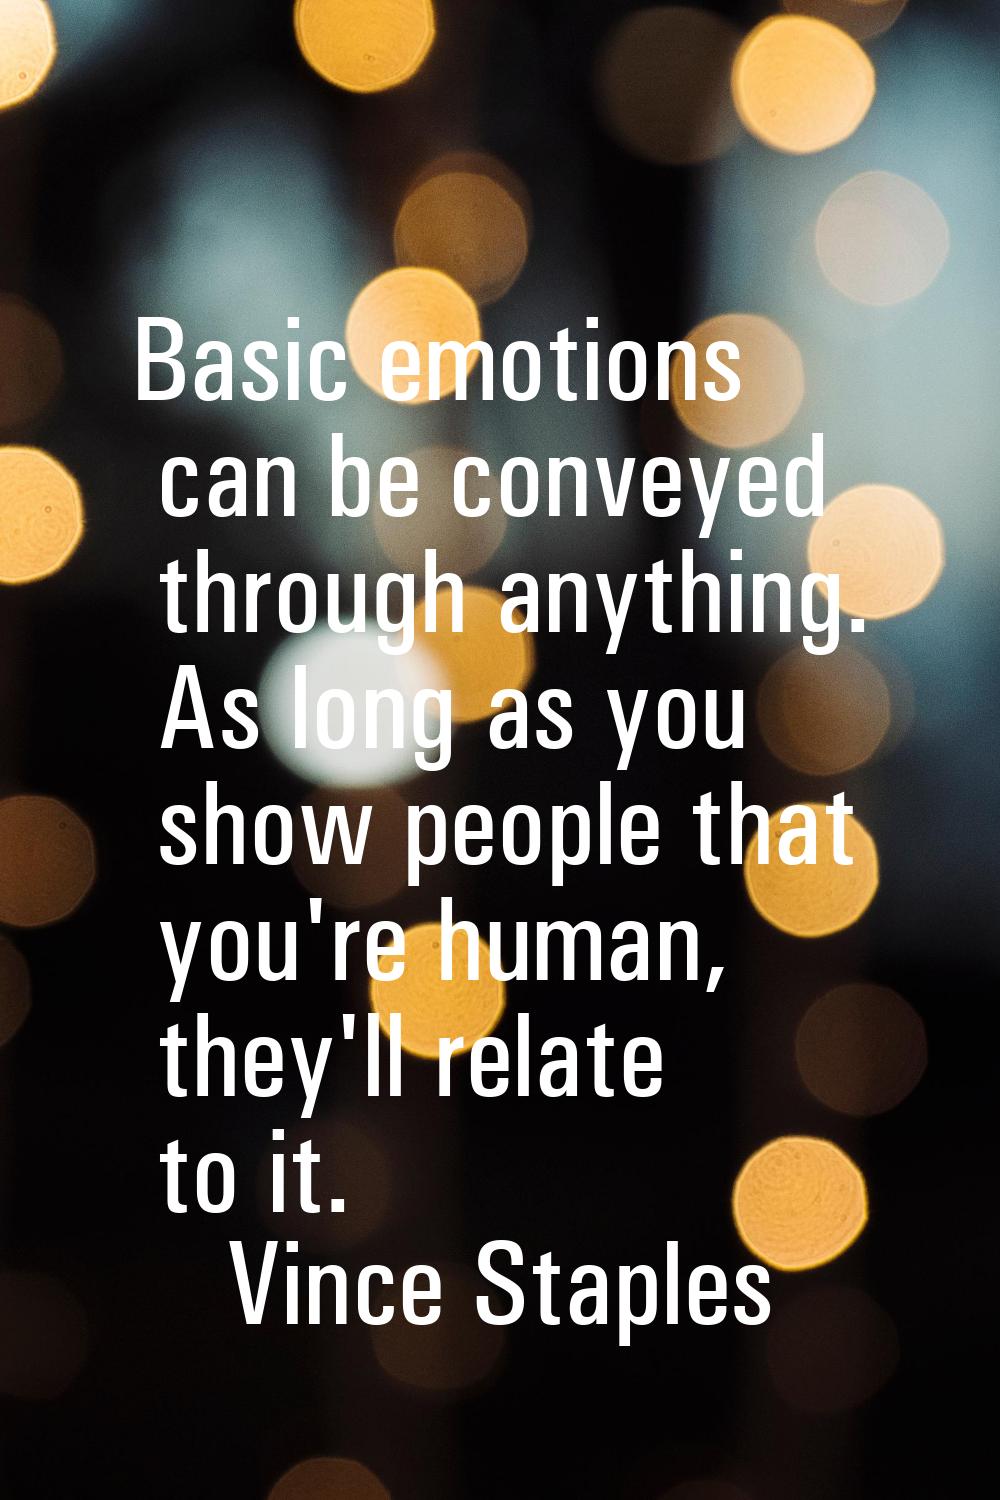 Basic emotions can be conveyed through anything. As long as you show people that you're human, they